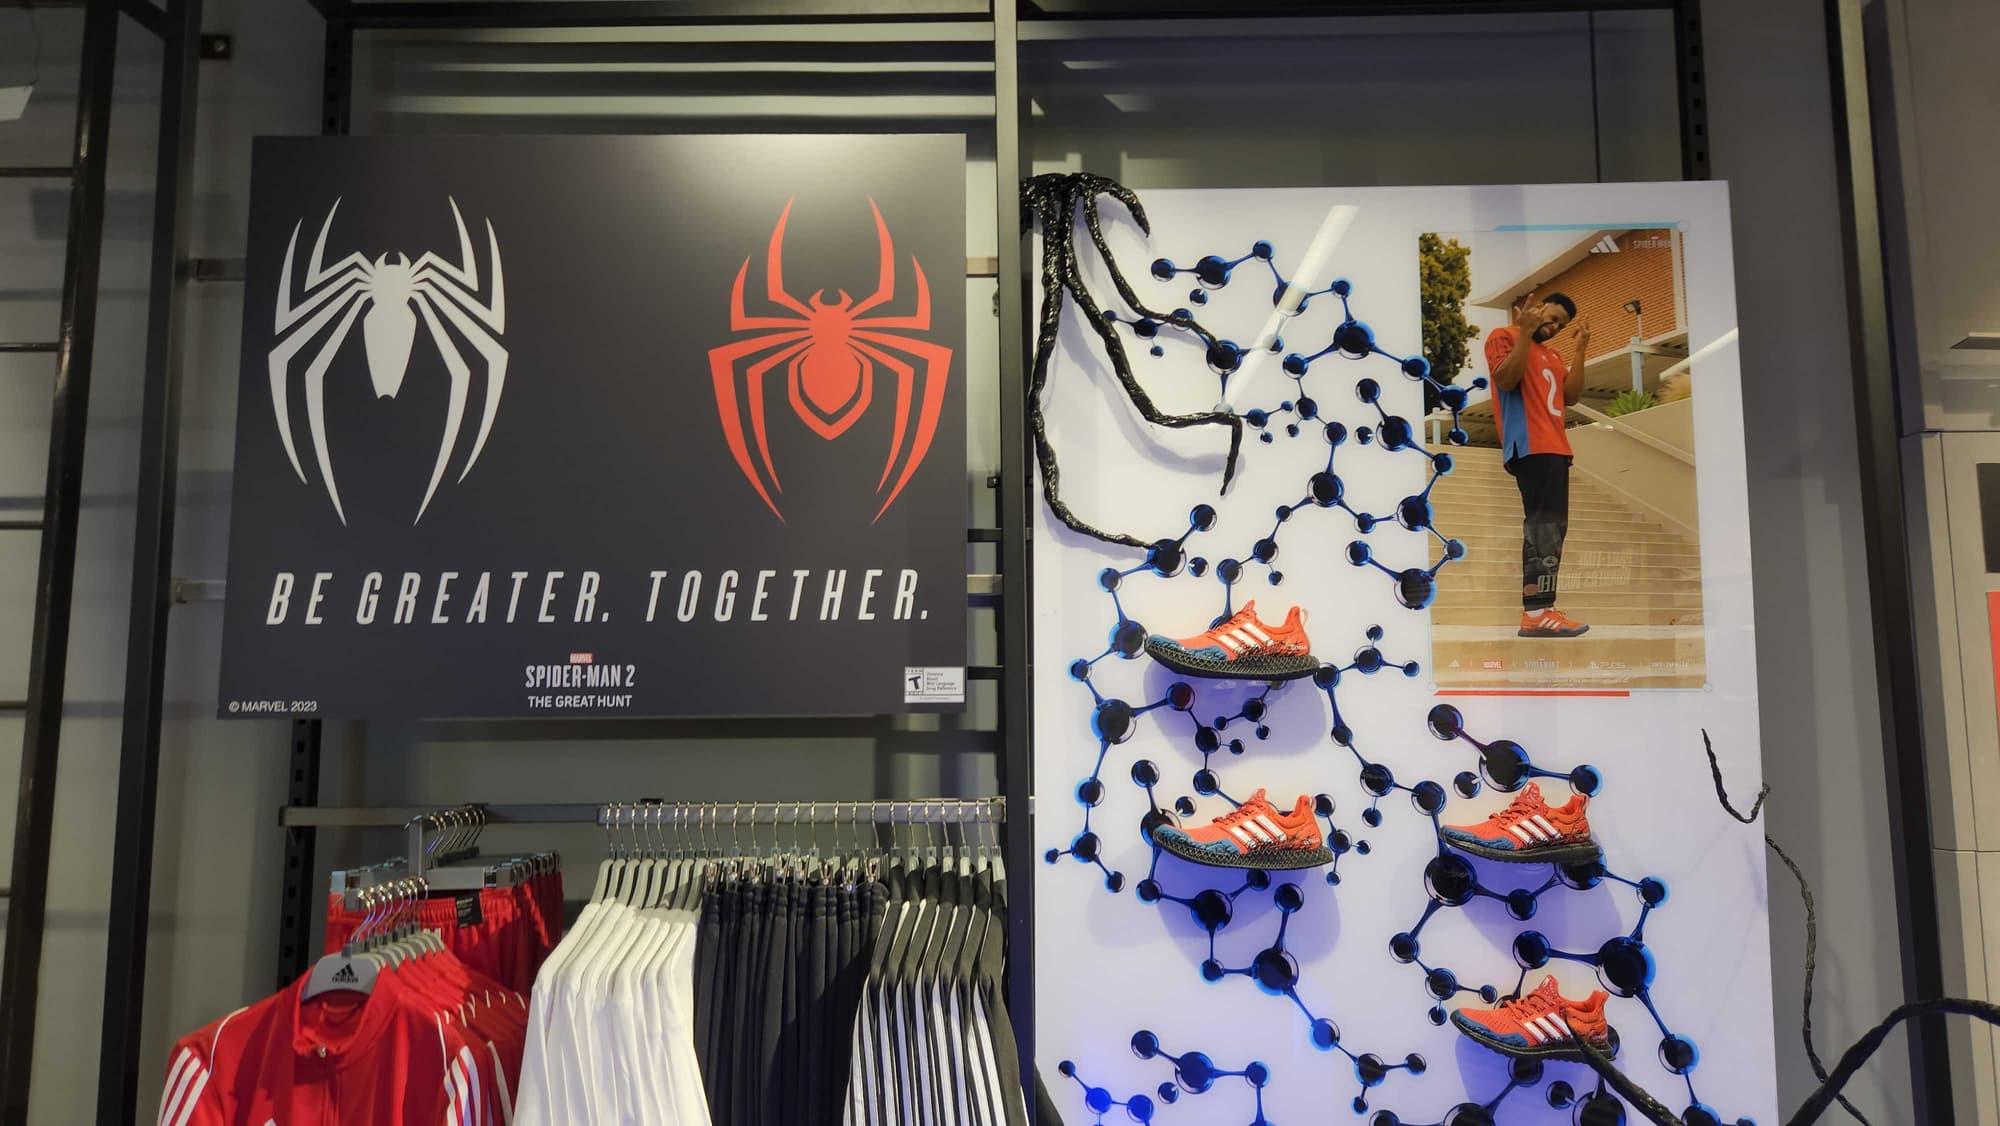 Marvel's Spider-Man 2 The Great Hunt Presented by adidas